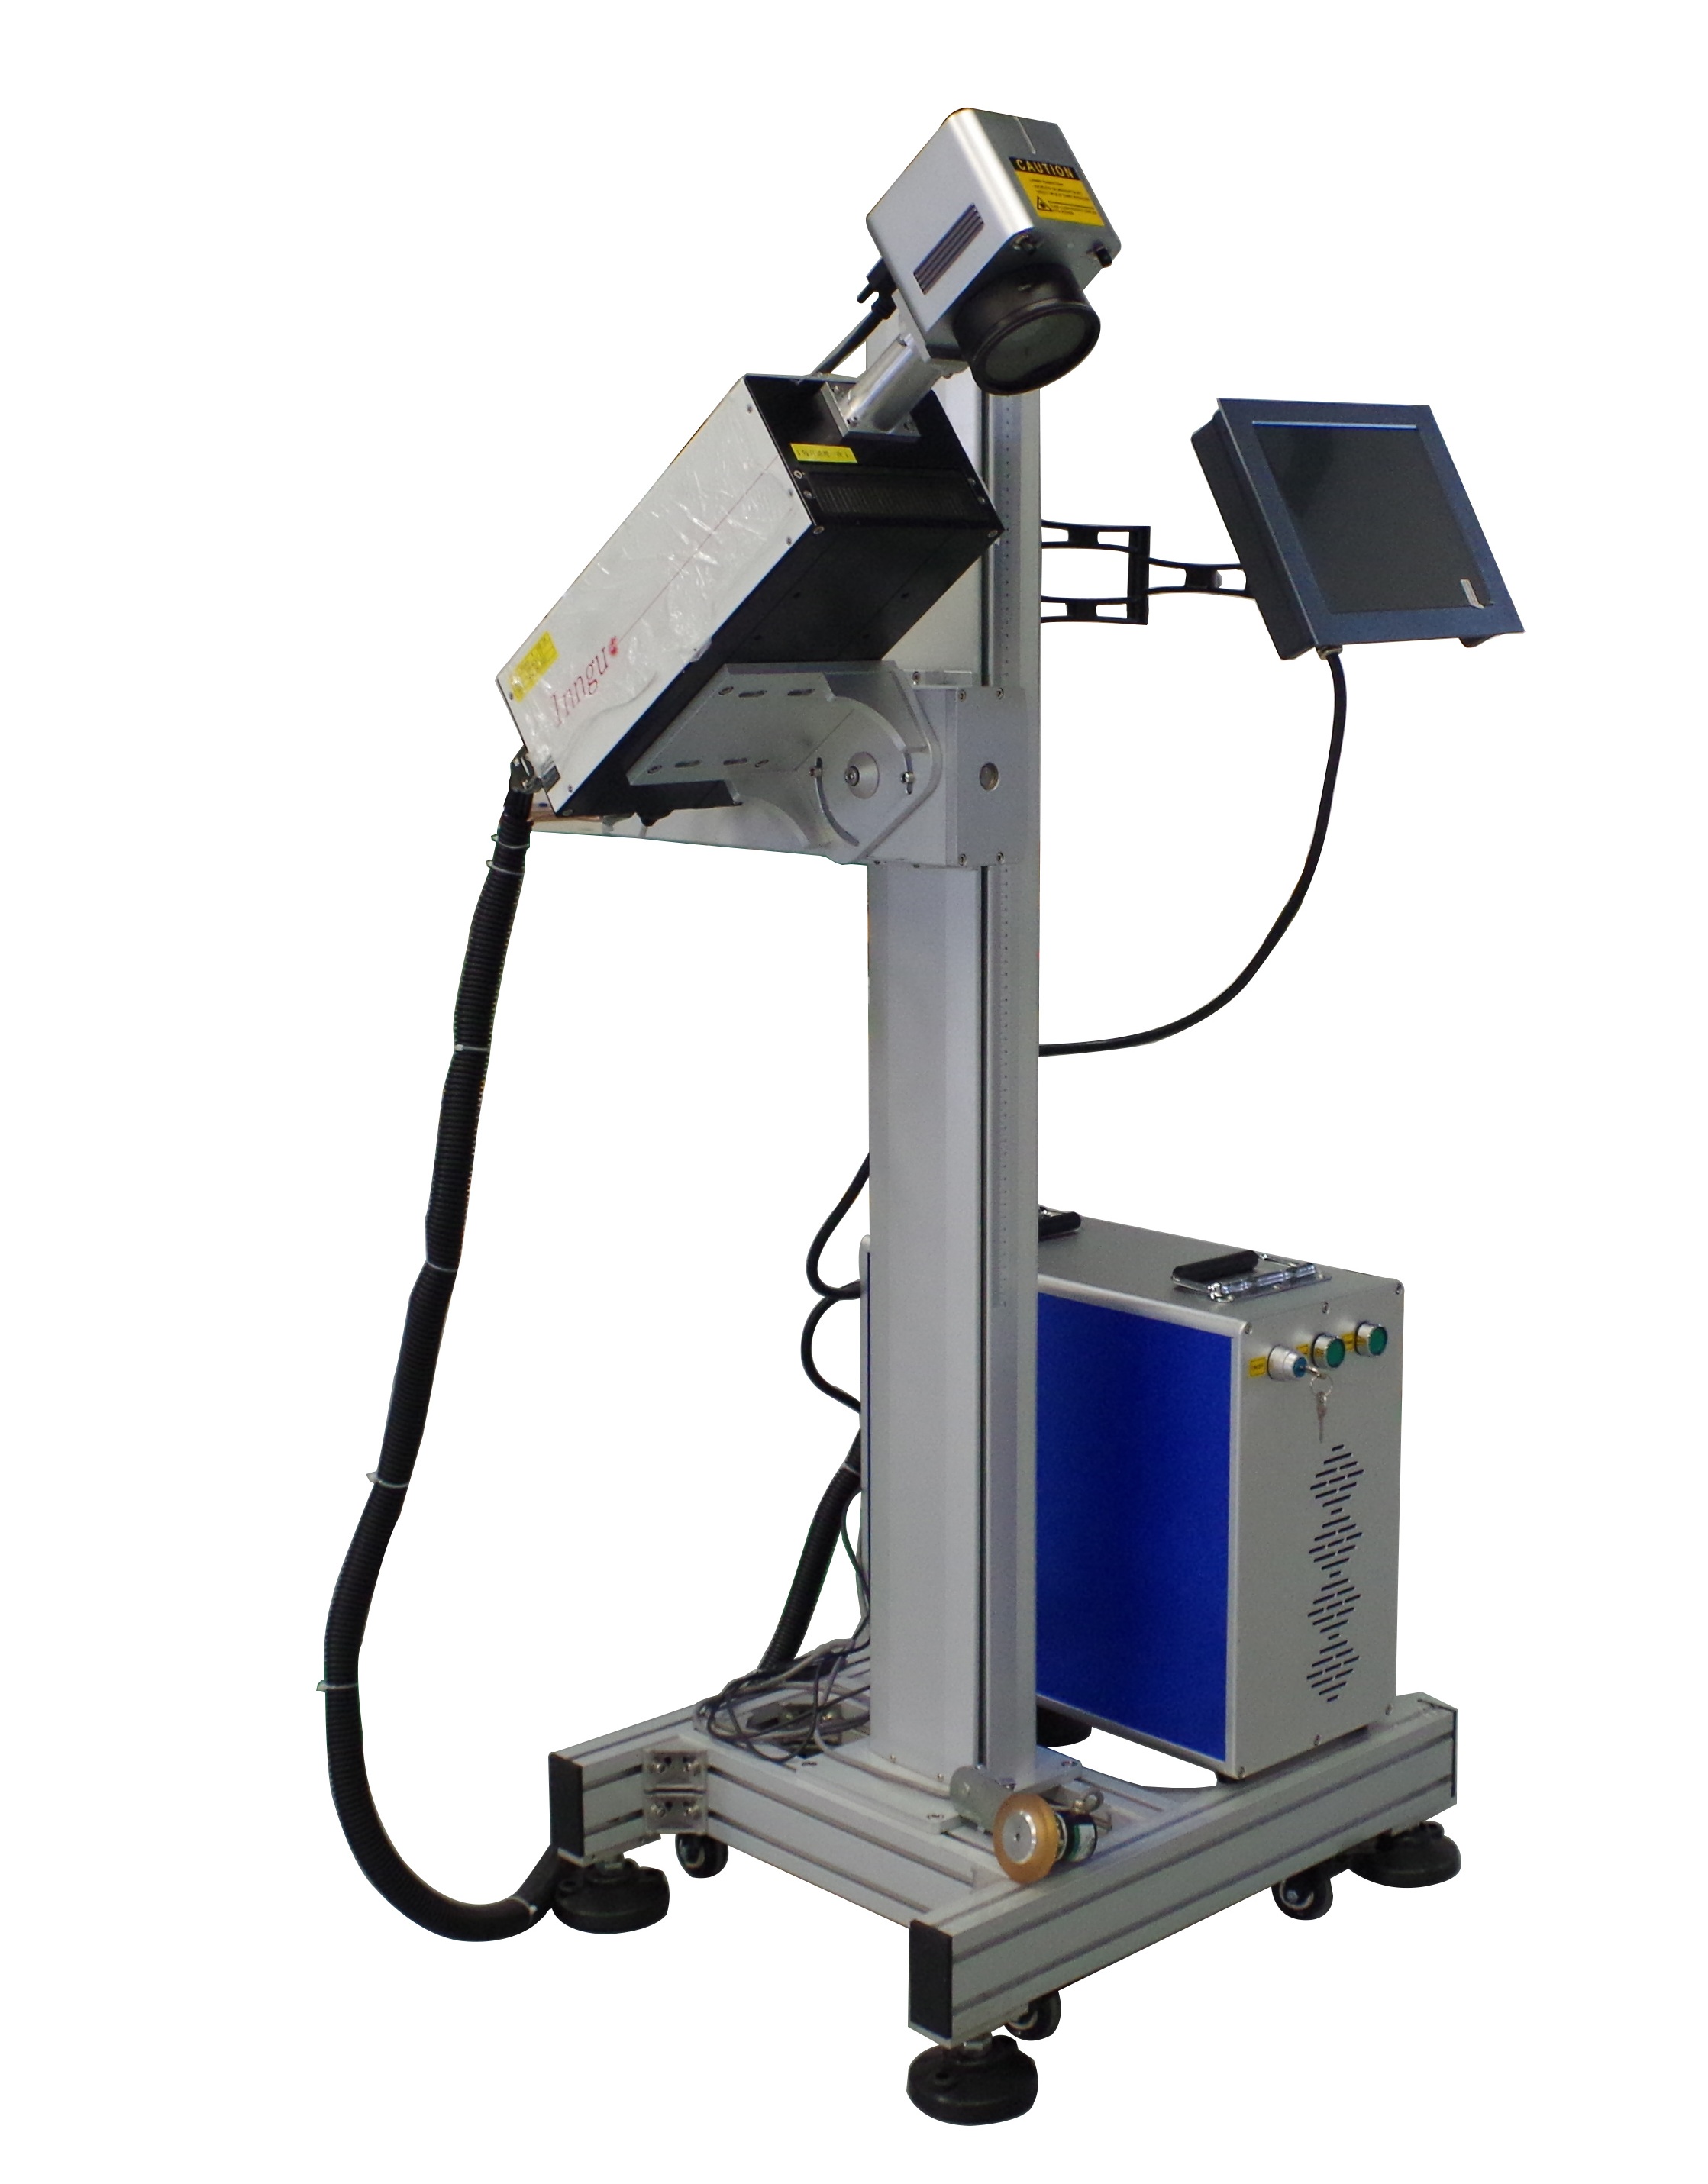 UV Laser Marking Machine 3W/5W With Auto Feeding System For Ultra Small Parts And Glass Bottles Plastic Marking